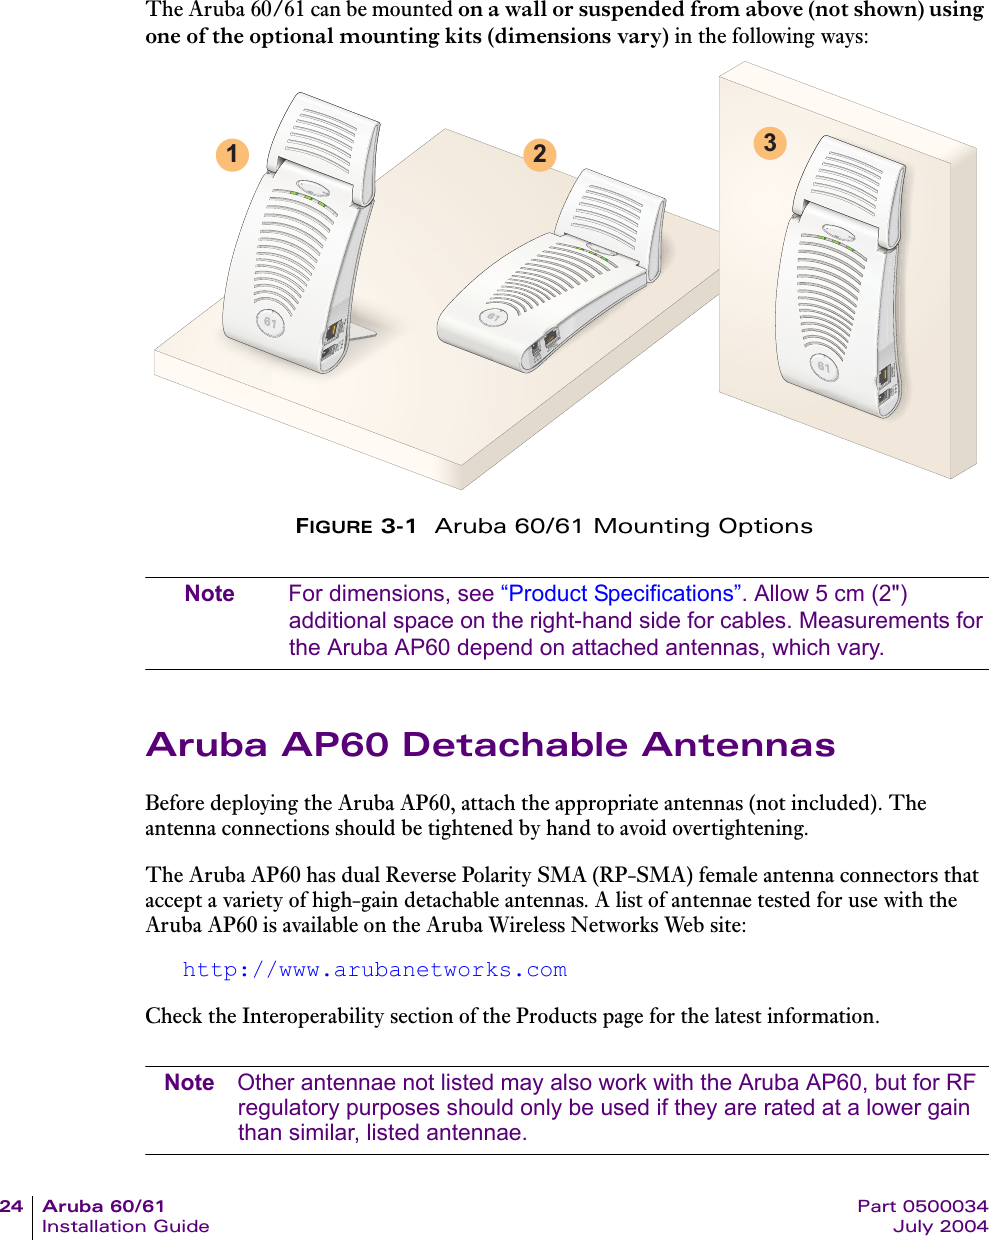 24 Aruba 60/61 Part 0500034Installation Guide July 2004The Aruba 60/61 can be mounted on a wall or suspended from above (not shown) using one of the optional mounting kits (dimensions vary) in the following ways:FIGURE 3-1  Aruba 60/61 Mounting OptionsNote For dimensions, see “Product Specifications”. Allow 5 cm (2&quot;) additional space on the right-hand side for cables. Measurements for the Aruba AP60 depend on attached antennas, which vary.Aruba AP60 Detachable AntennasBefore deploying the Aruba AP60, attach the appropriate antennas (not included). The antenna connections should be tightened by hand to avoid overtightening.The Aruba AP60 has dual Reverse Polarity SMA (RP-SMA) female antenna connectors that accept a variety of high-gain detachable antennas. A list of antennae tested for use with the Aruba AP60 is available on the Aruba Wireless Networks Web site:http://www.arubanetworks.comCheck the Interoperability section of the Products page for the latest information.Note Other antennae not listed may also work with the Aruba AP60, but for RF regulatory purposes should only be used if they are rated at a lower gain than similar, listed antennae.1 2 3